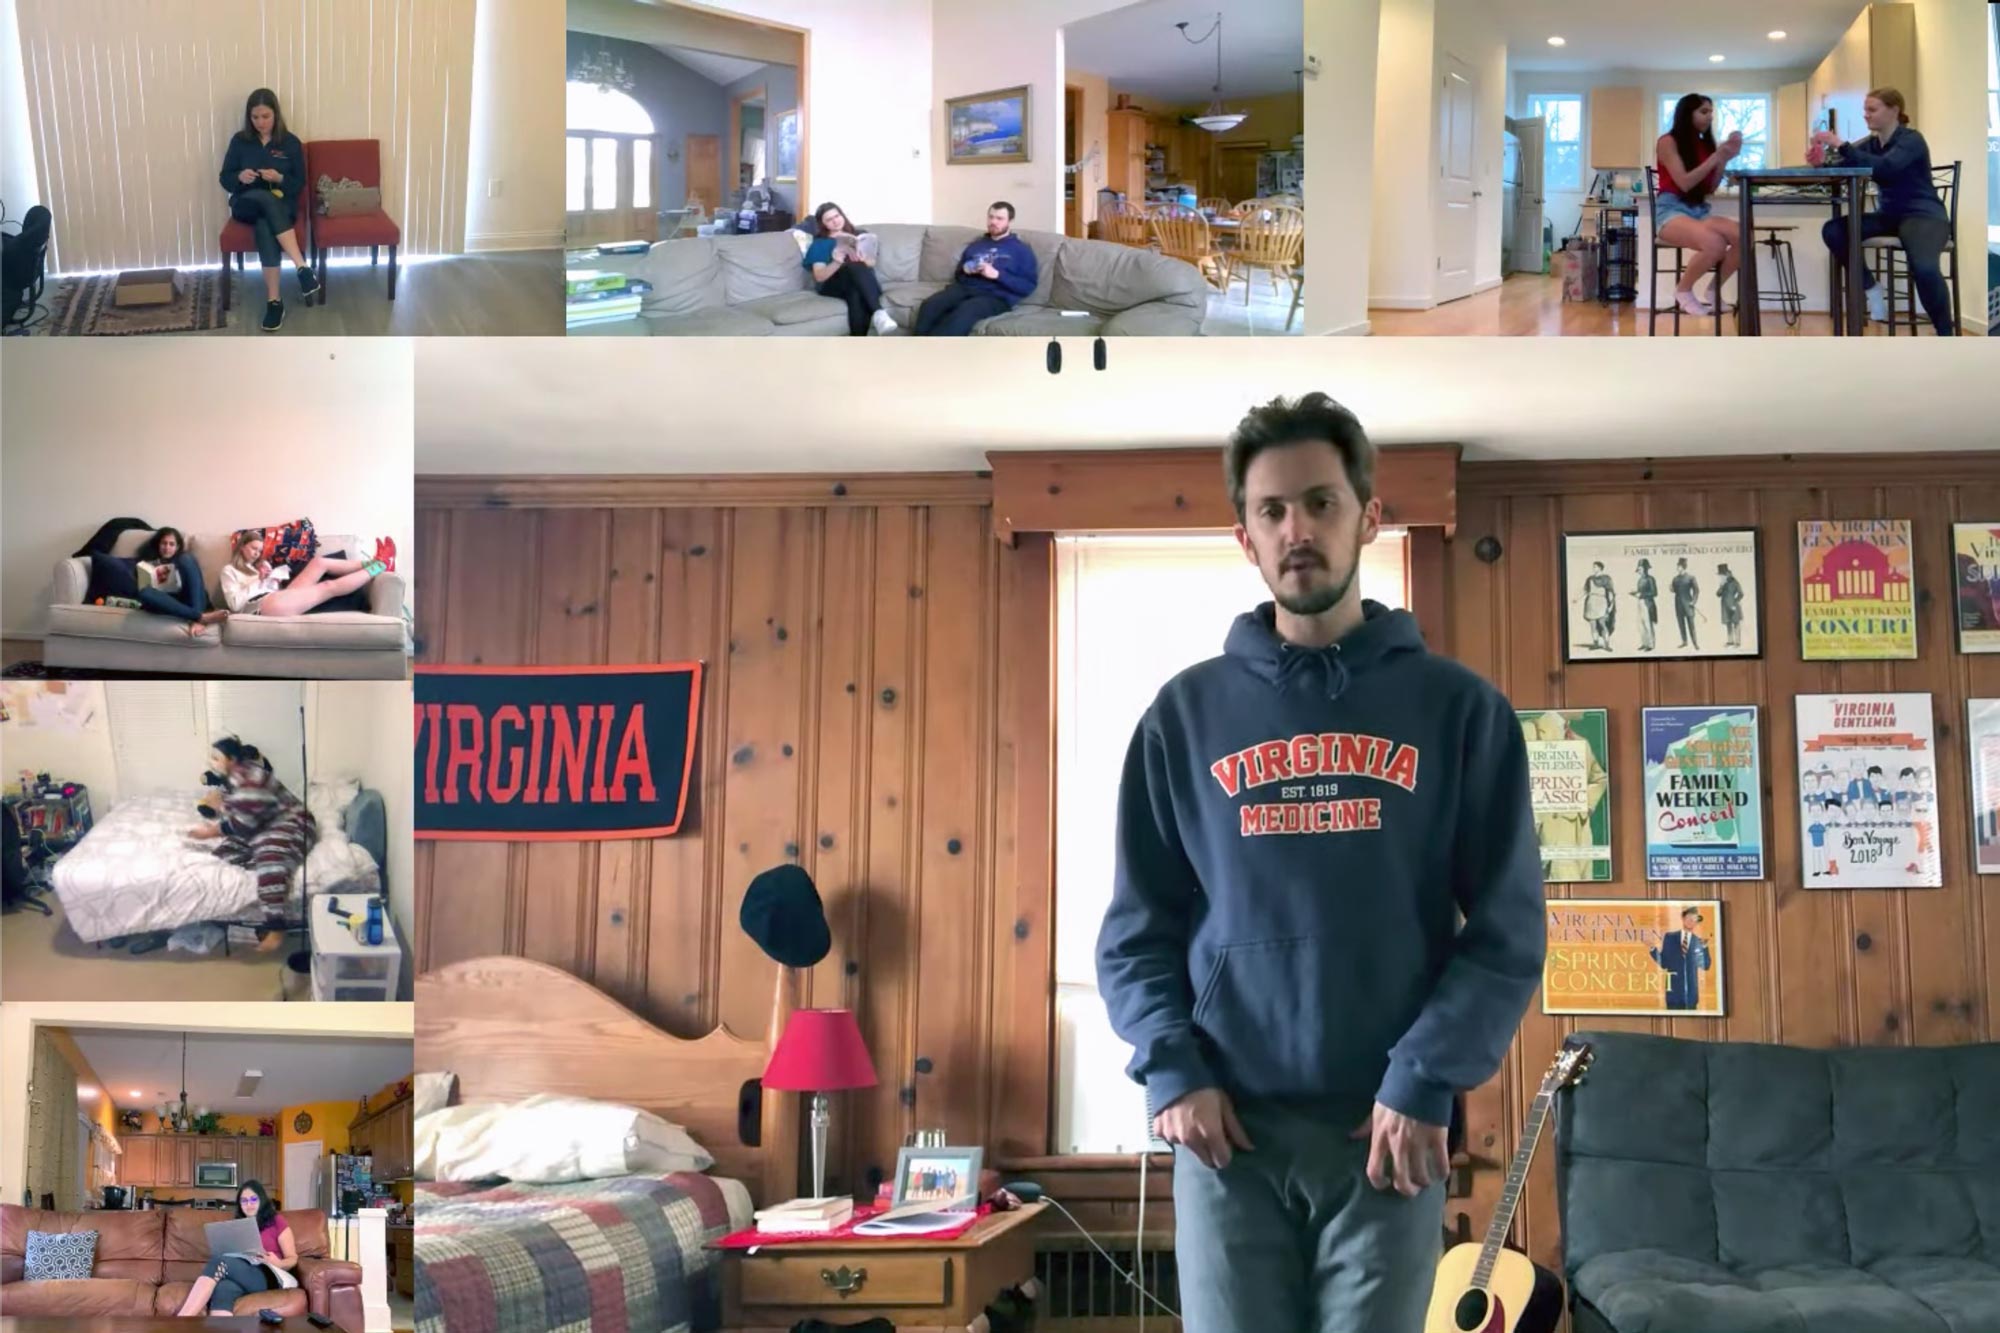 multiple images of students in their homes doing various activities